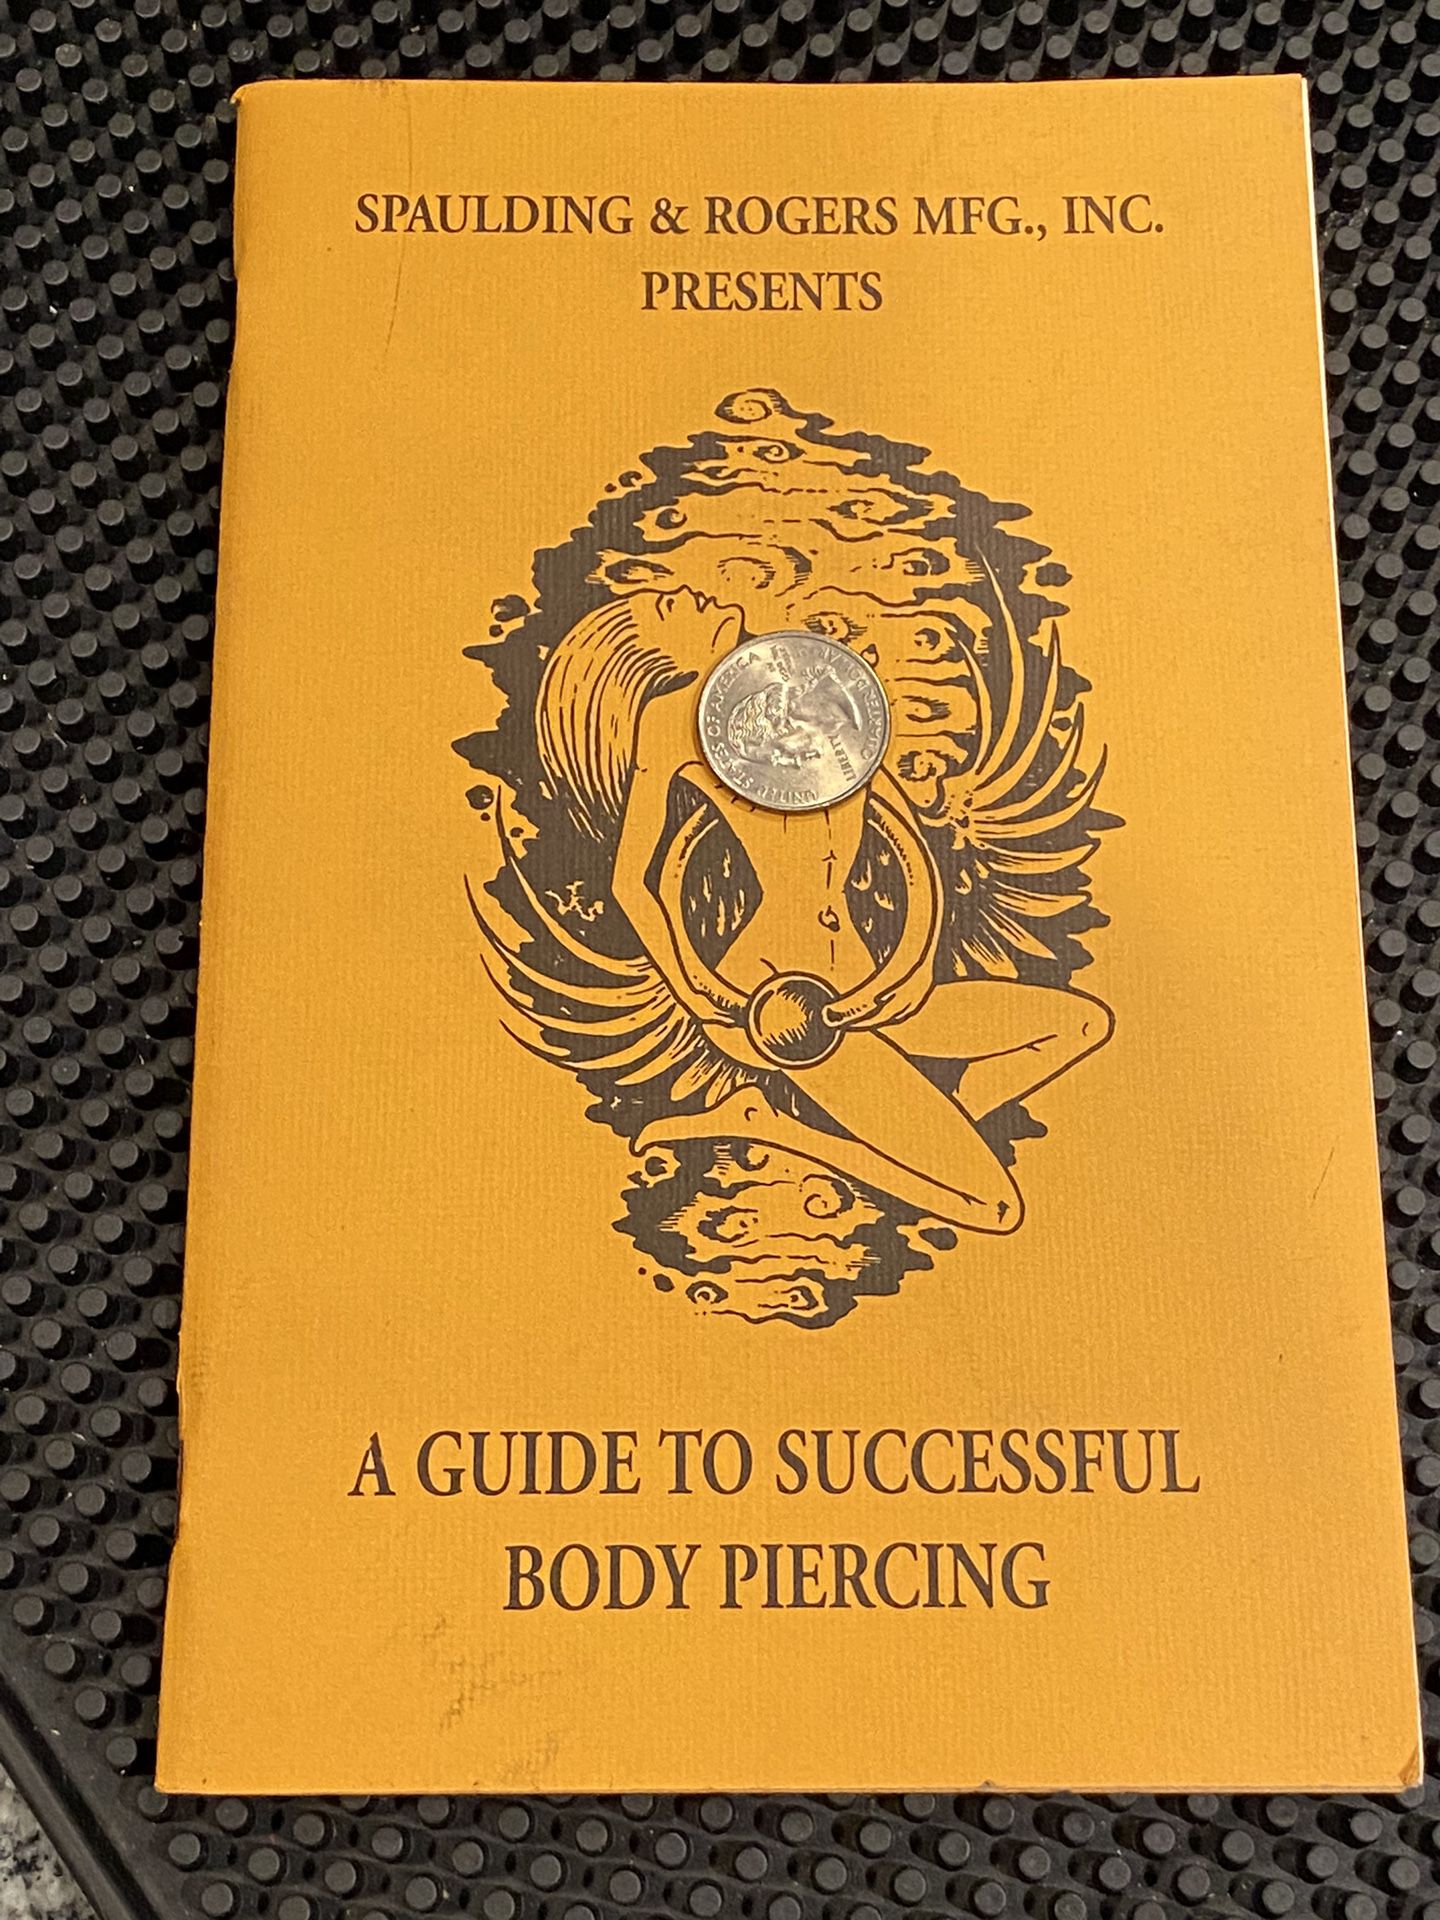 Spaulding & Rogers Book Of Piercing, Vintage 1996. Great Condition 48 Pages. No writing on pages.